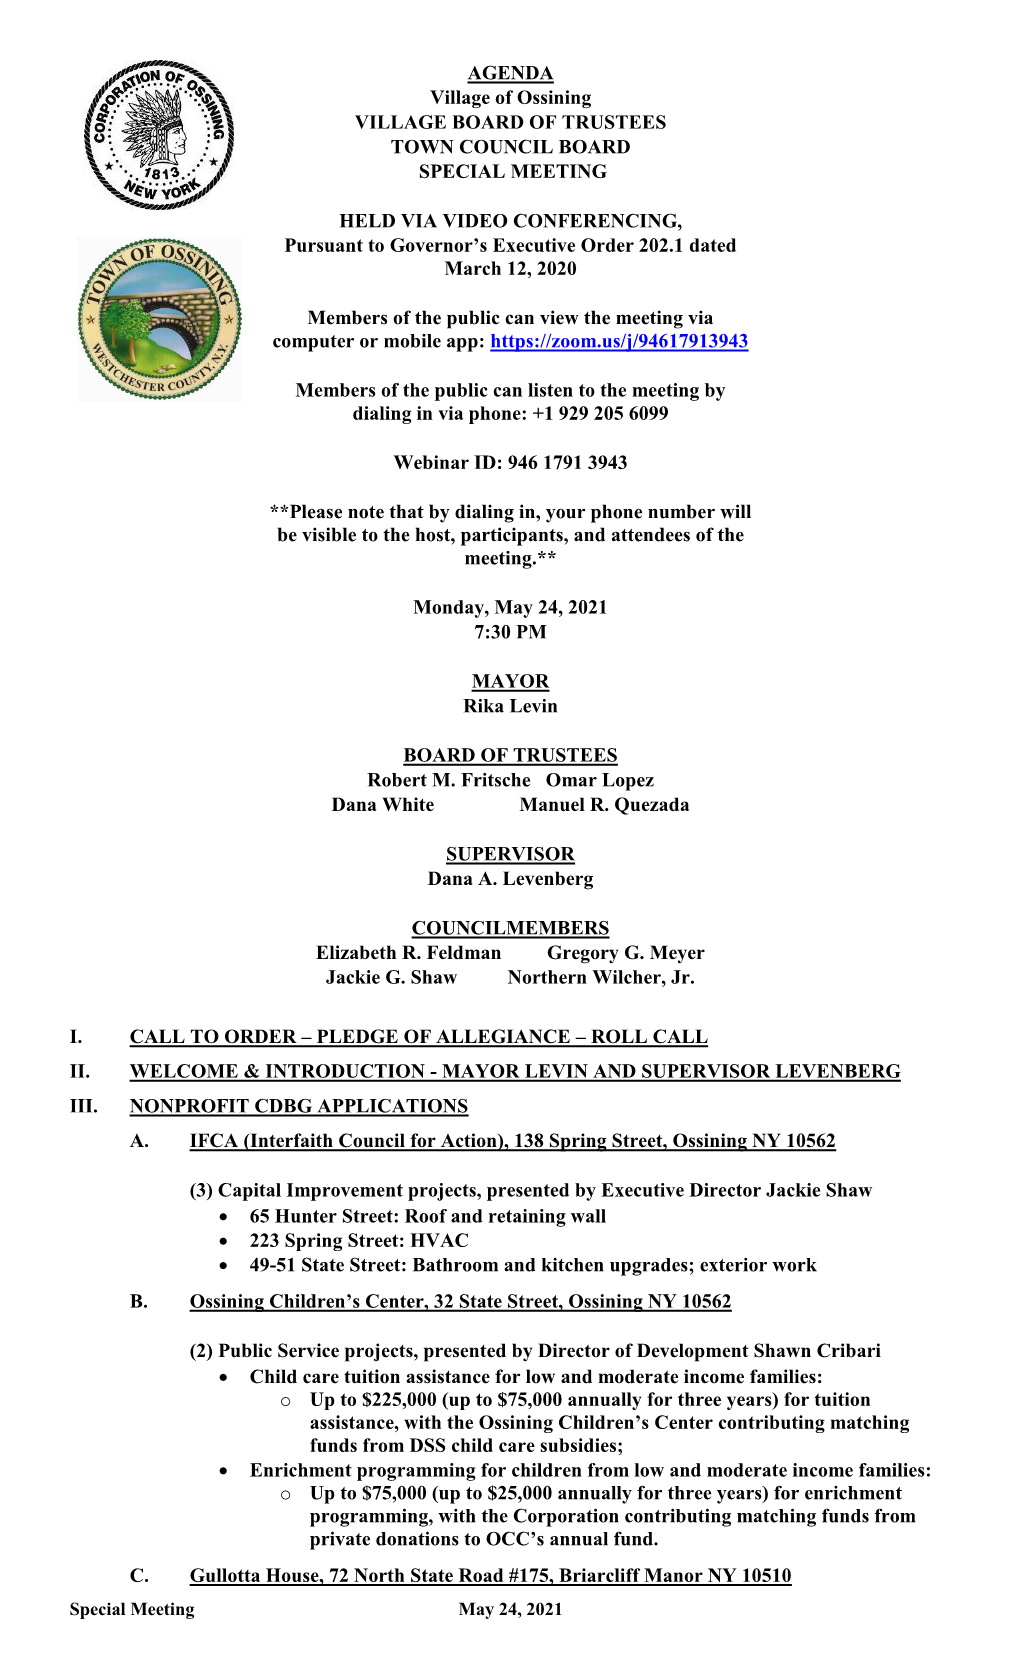 AGENDA Village of Ossining VILLAGE BOARD of TRUSTEES TOWN COUNCIL BOARD SPECIAL MEETING